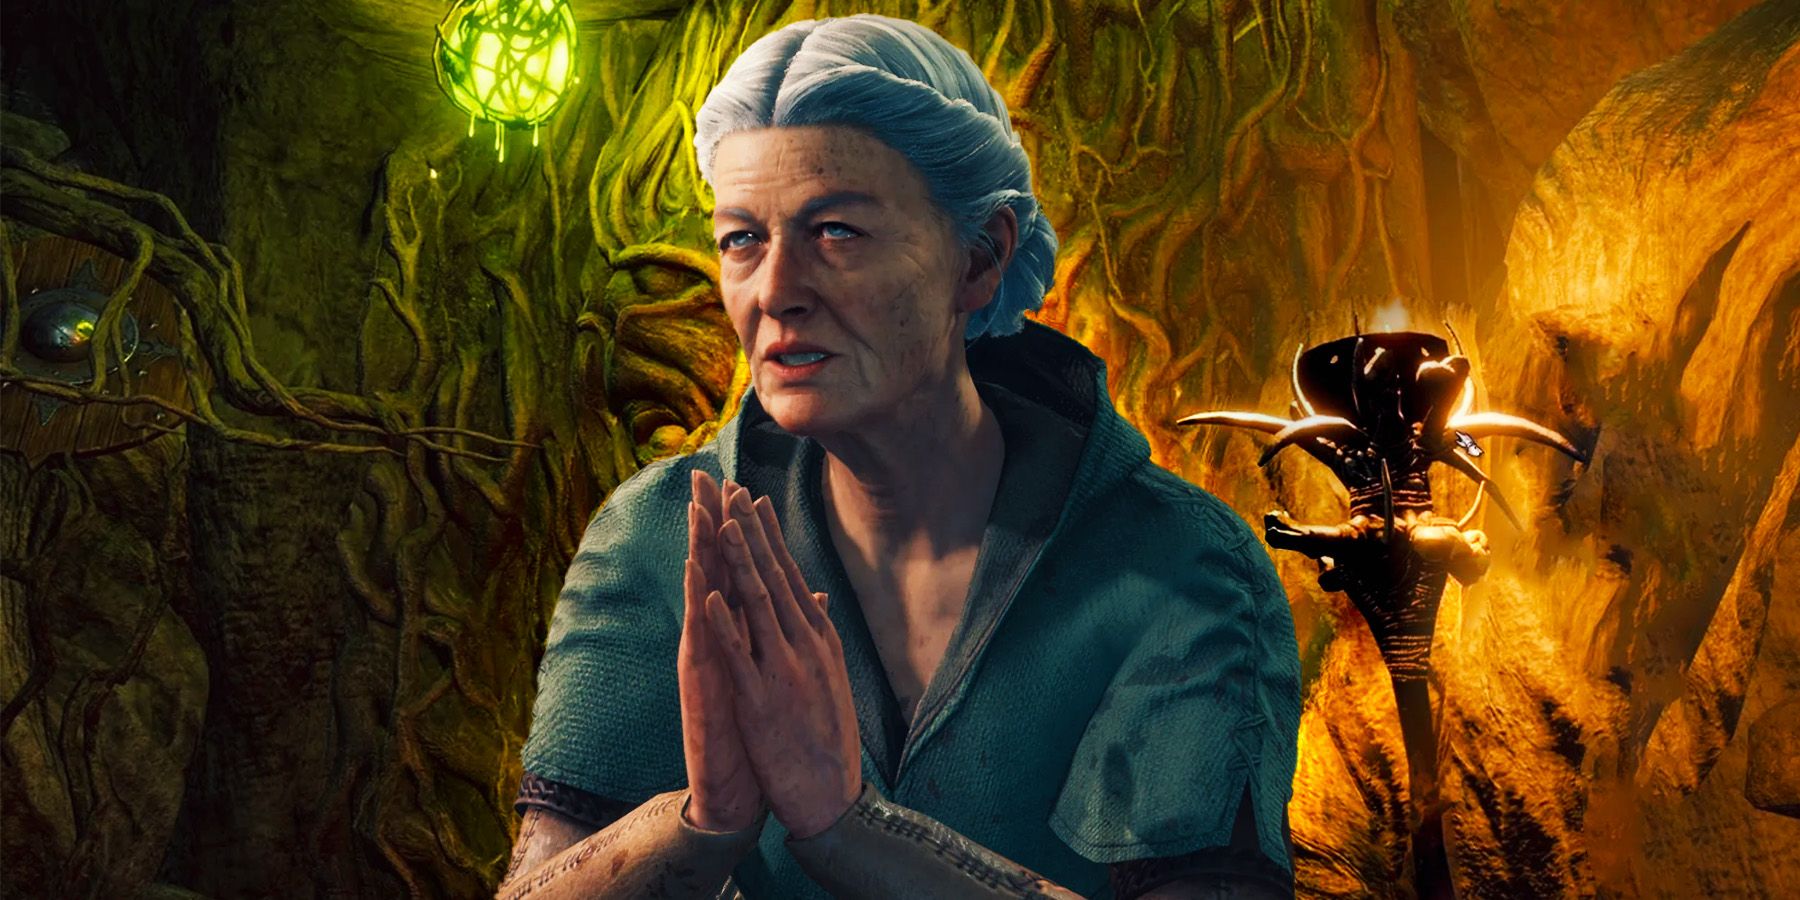 Auntie Ethel, an elderly woman with her hands clasped together, in Baldur's Gate 3.